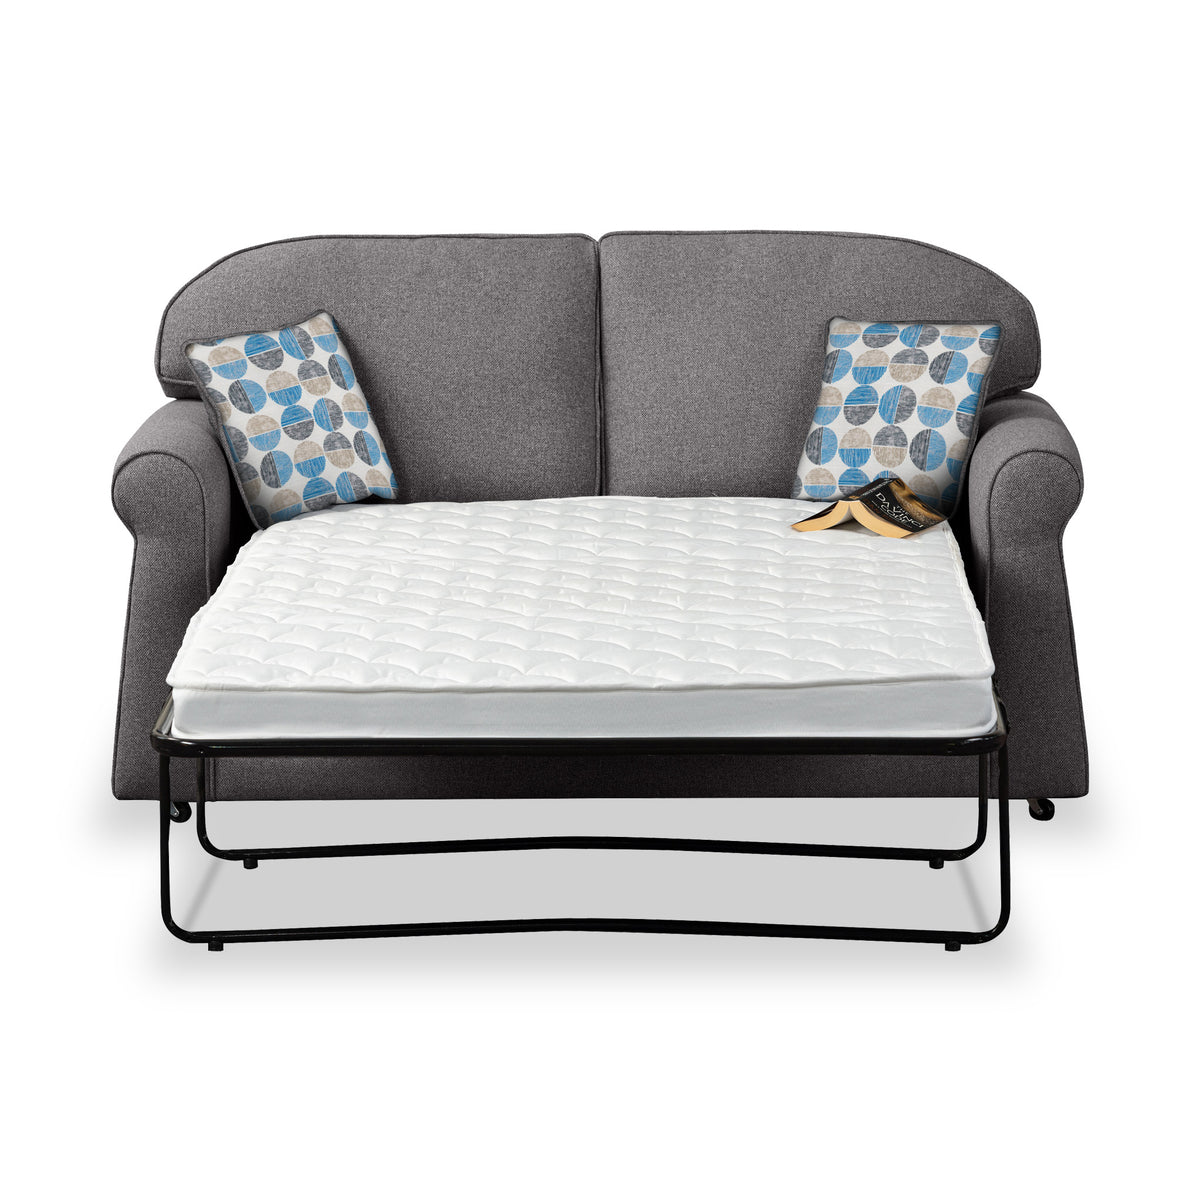 Giselle Charcoal Soft Weave 2 Seater Sofabed with Blue Scatter Cushions from Roseland Furniture